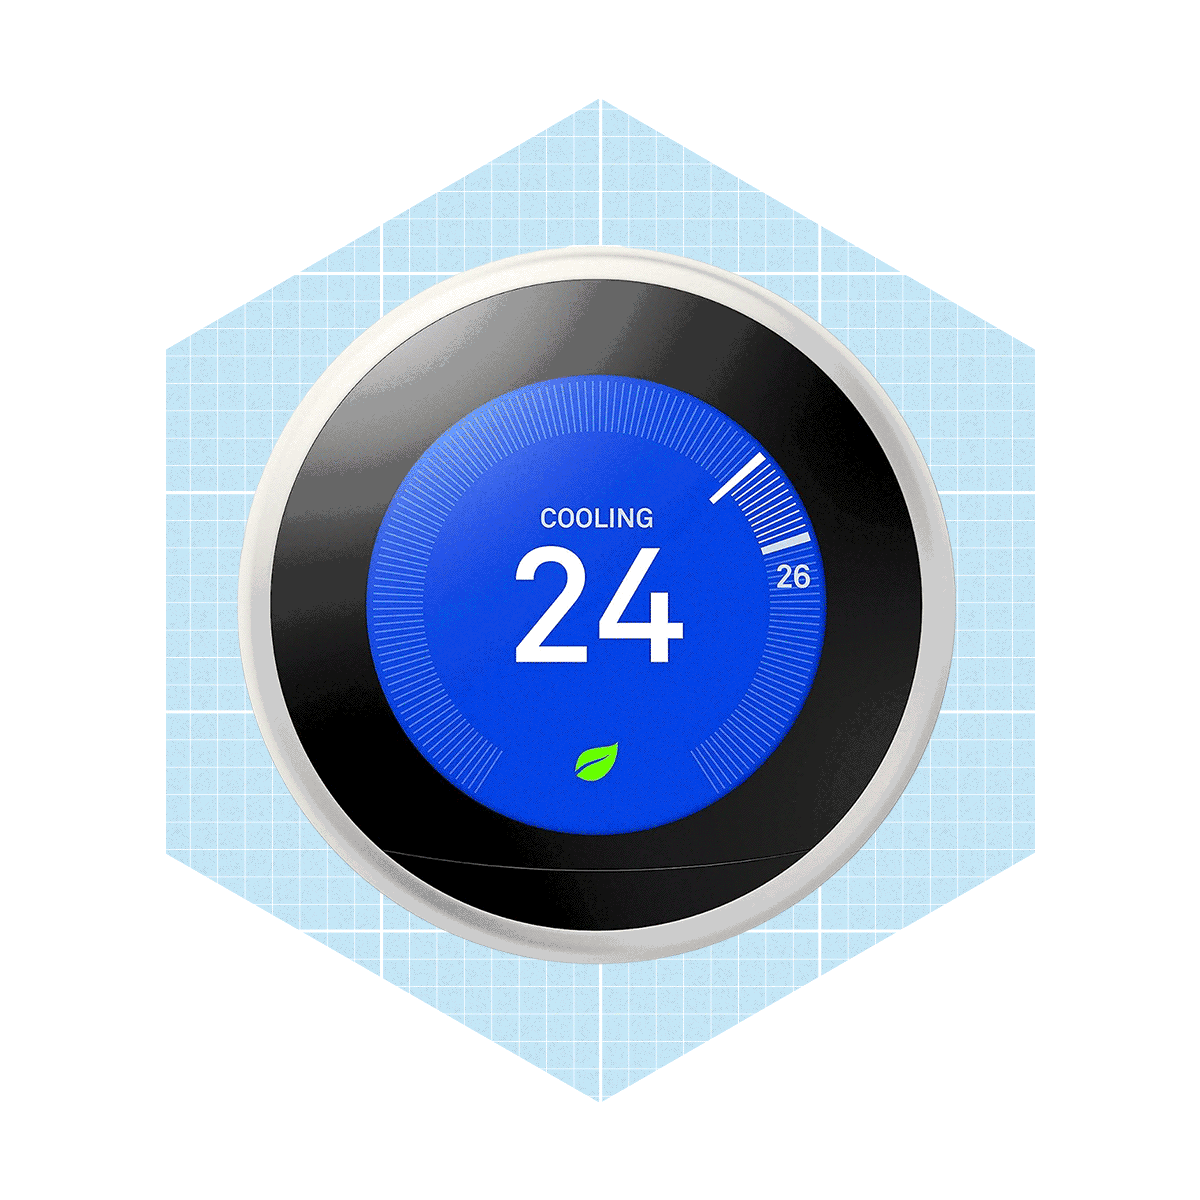 We Tested the 4 Best Smart Thermostats to Control Your Temperature and Electric Bill